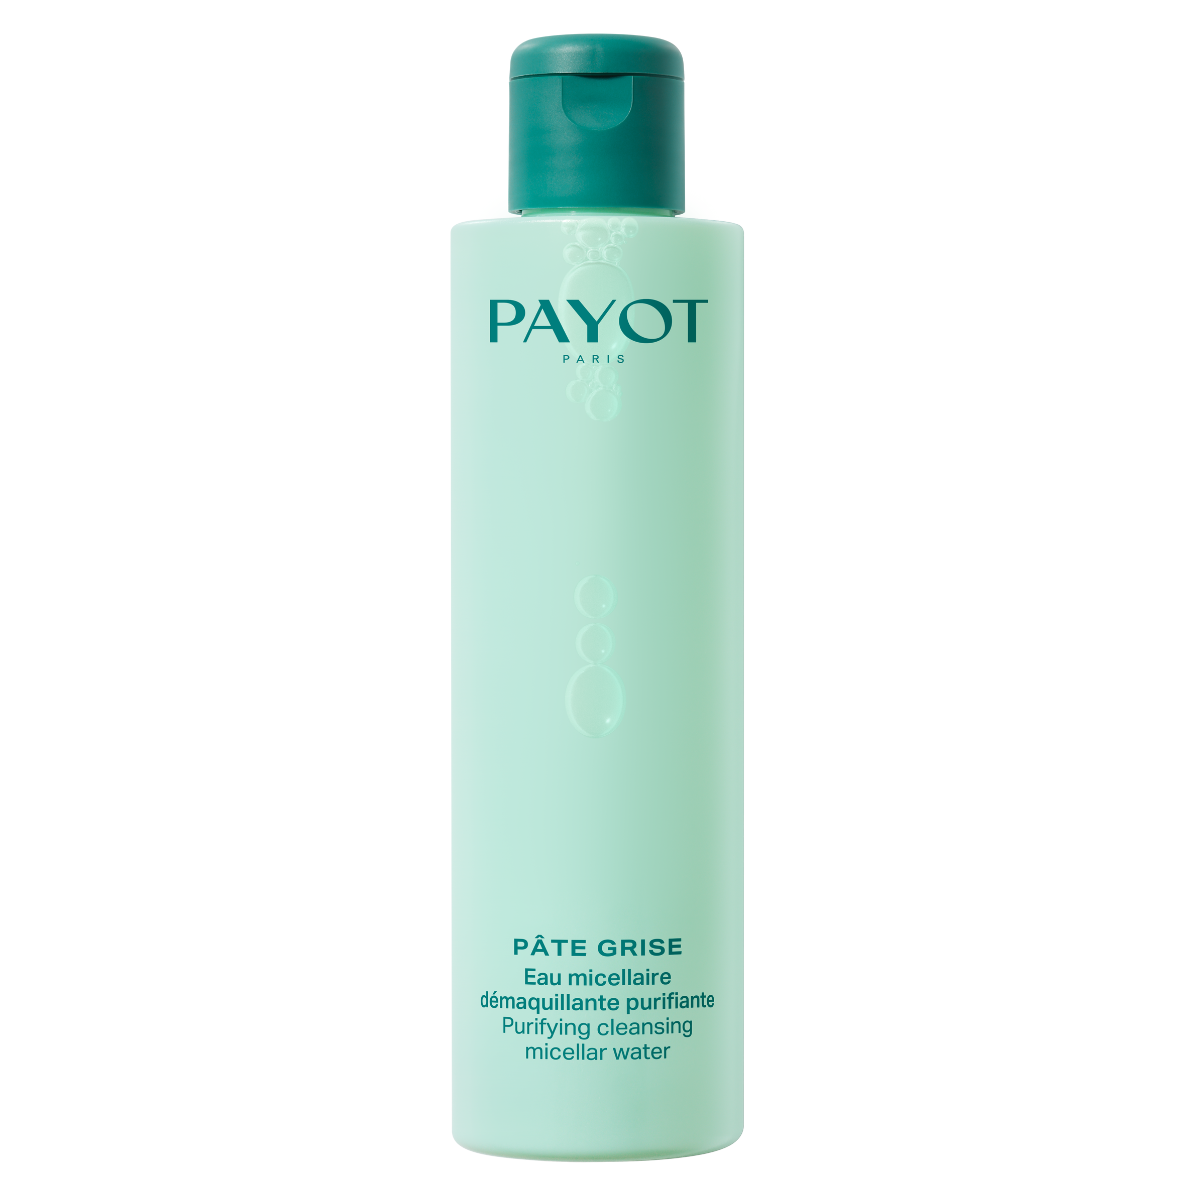 Payot - Pâte Grise Purifying Micellaire Cleansing Water 200 ml - Skjønnhet